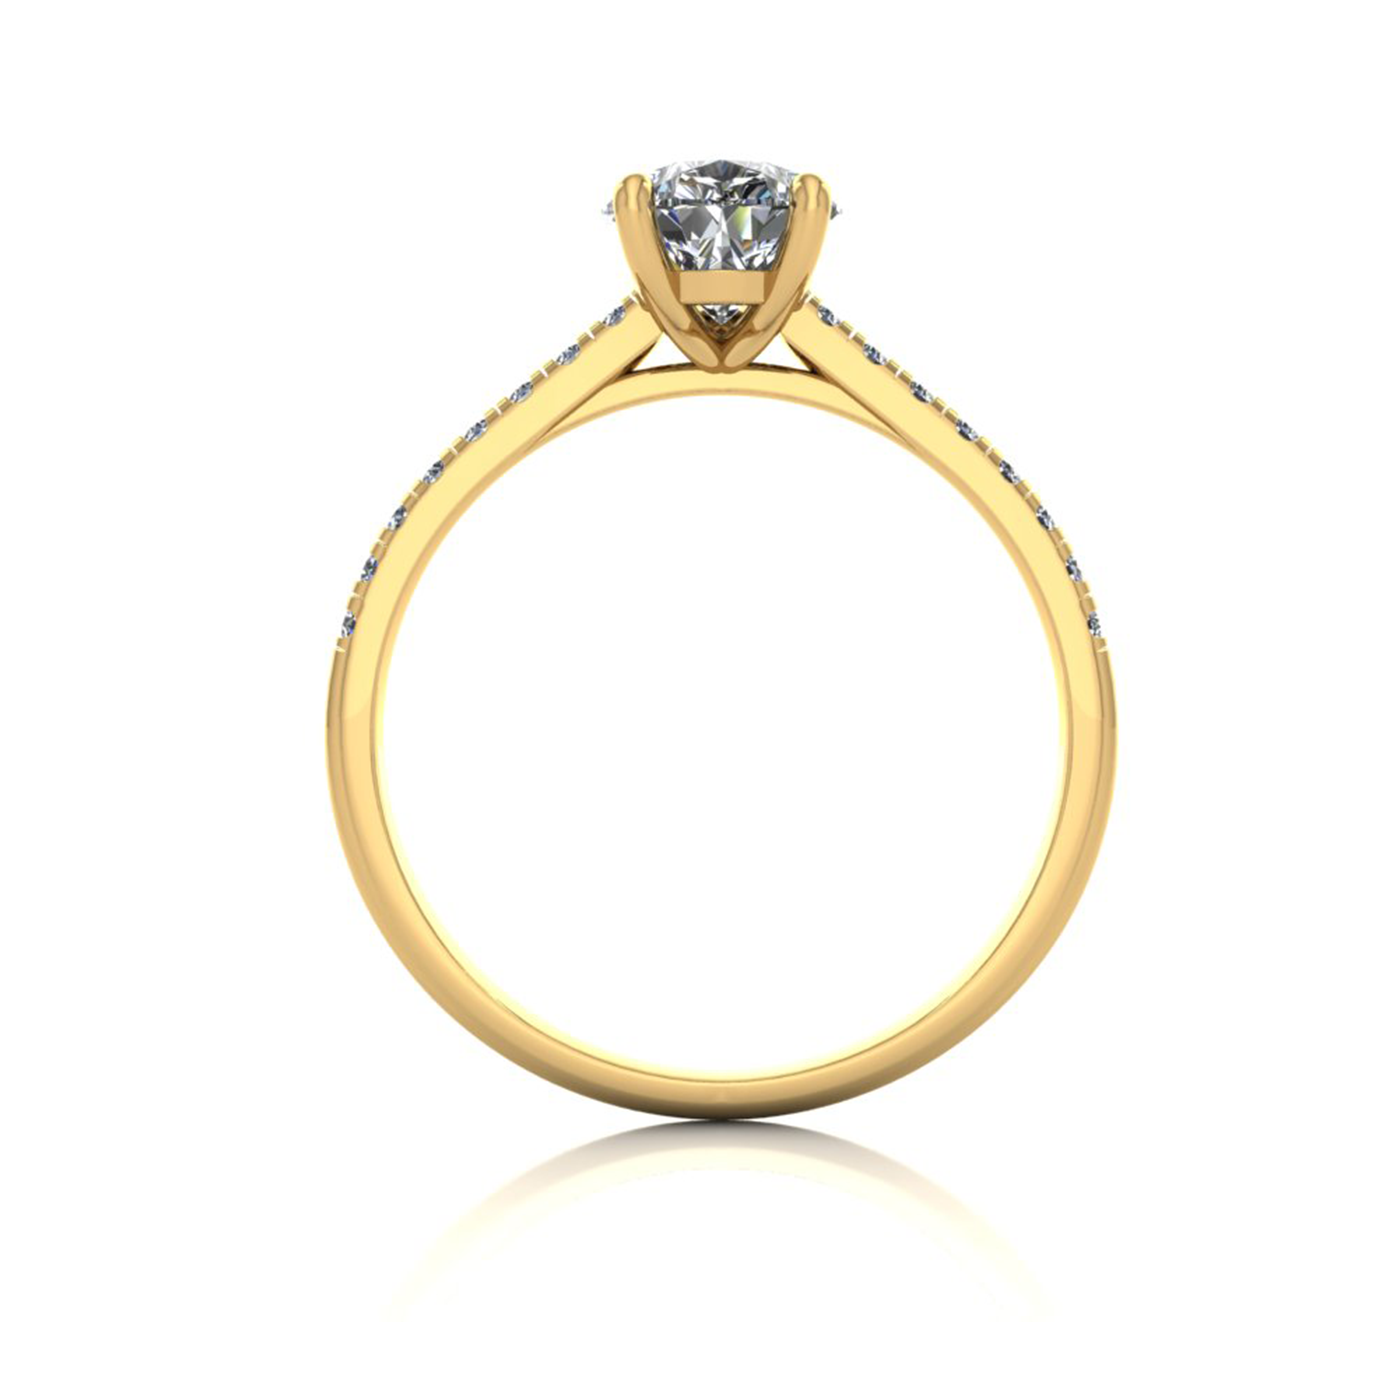 18k yellow gold 1.2ct 3 prongs pear diamond engagement ring with whisper thin pavÉ set band